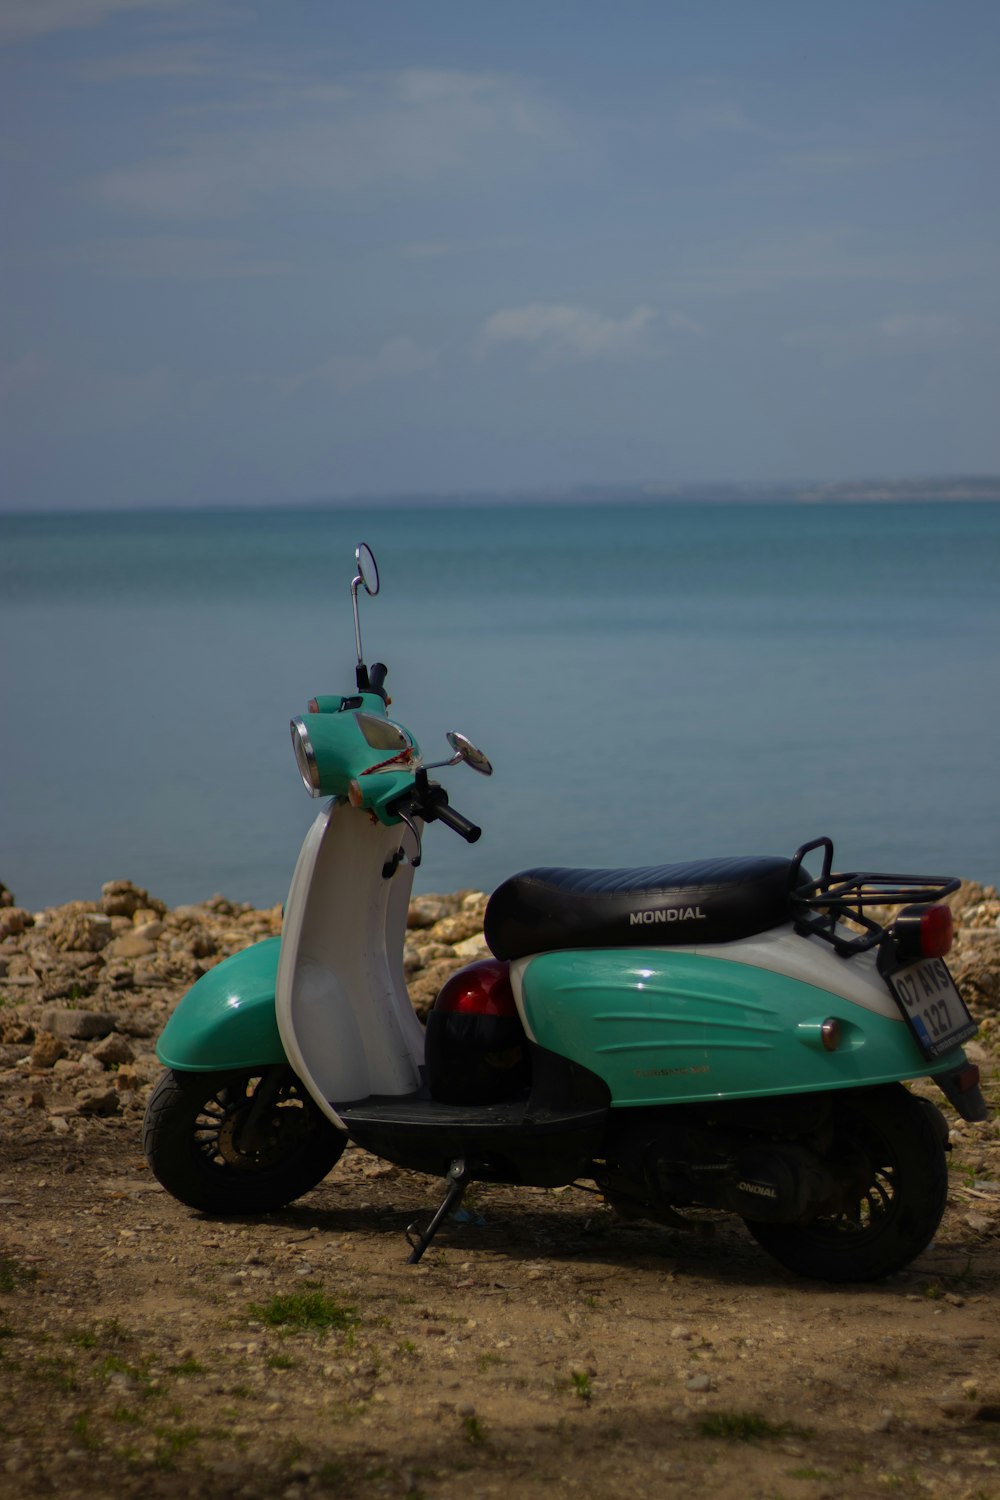 a scooter parked on the beach near the water